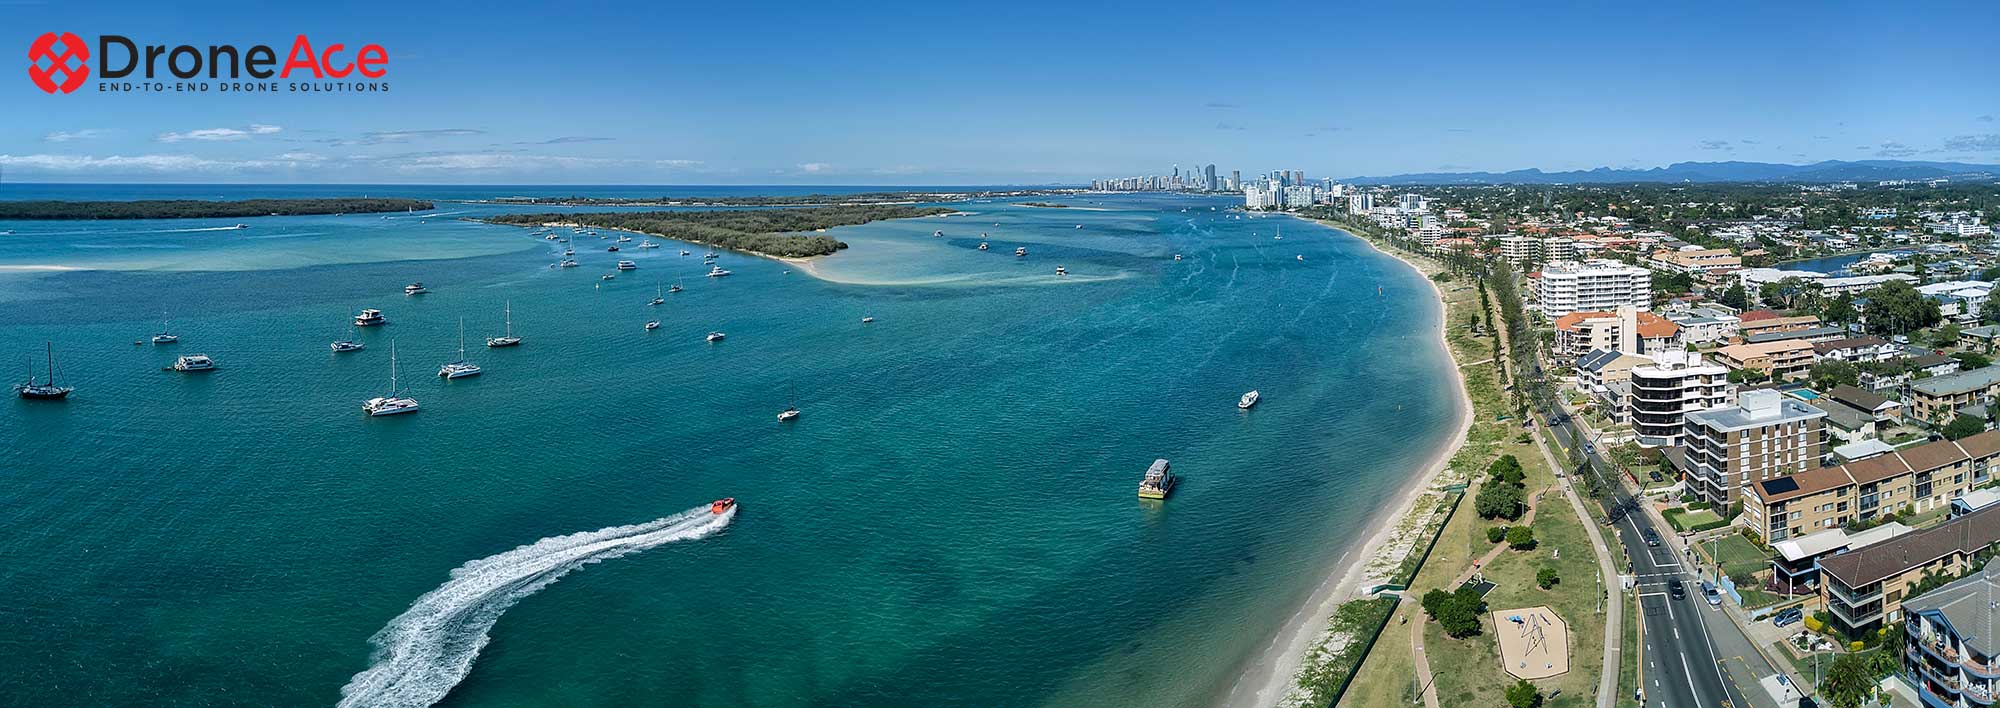 Gold-Coast-Broadwater-aerial-drone-panorama-photography-DroneAce